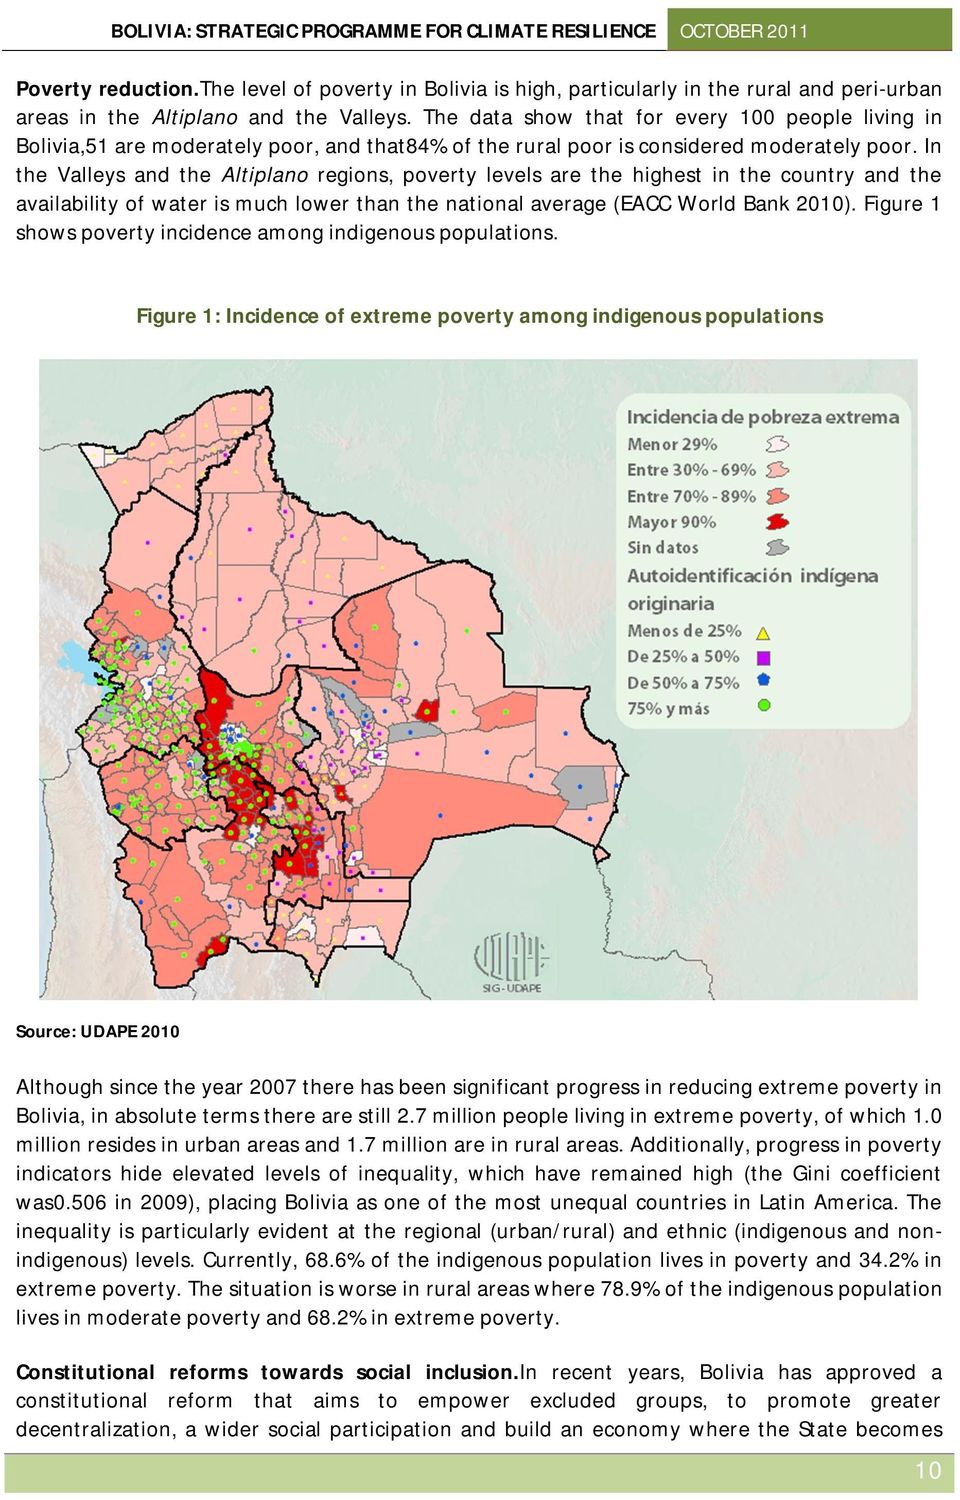 In the Valleys and the Altiplano regions, poverty levels are the highest in the country and the availability of water is much lower than the national average (EACC World Bank 2010).